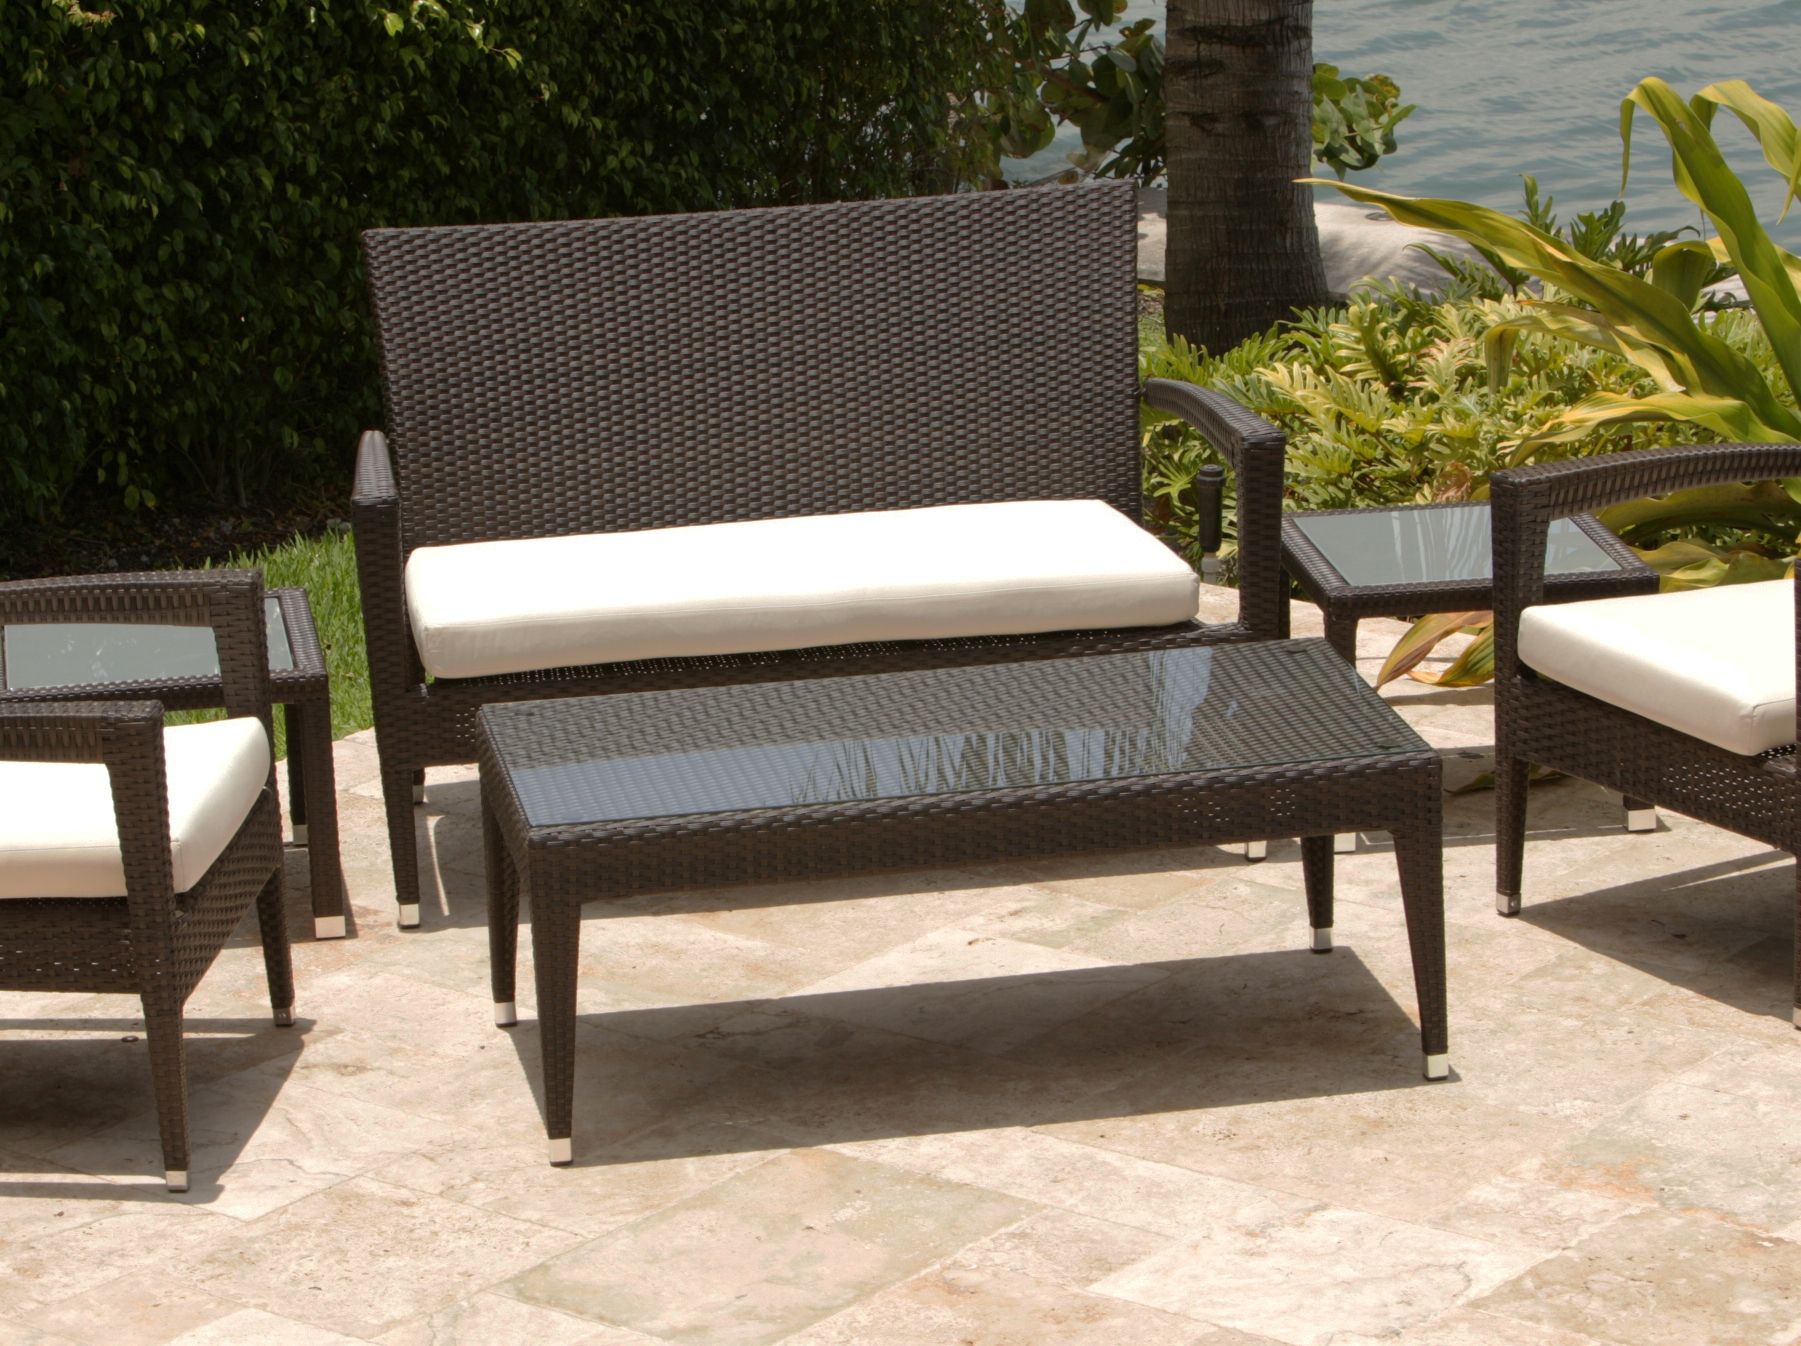 Strict Outdoor Rattan Coffee Table With Glass Top Inside 4pcs Rattan Patio Coffee Tables (View 10 of 20)